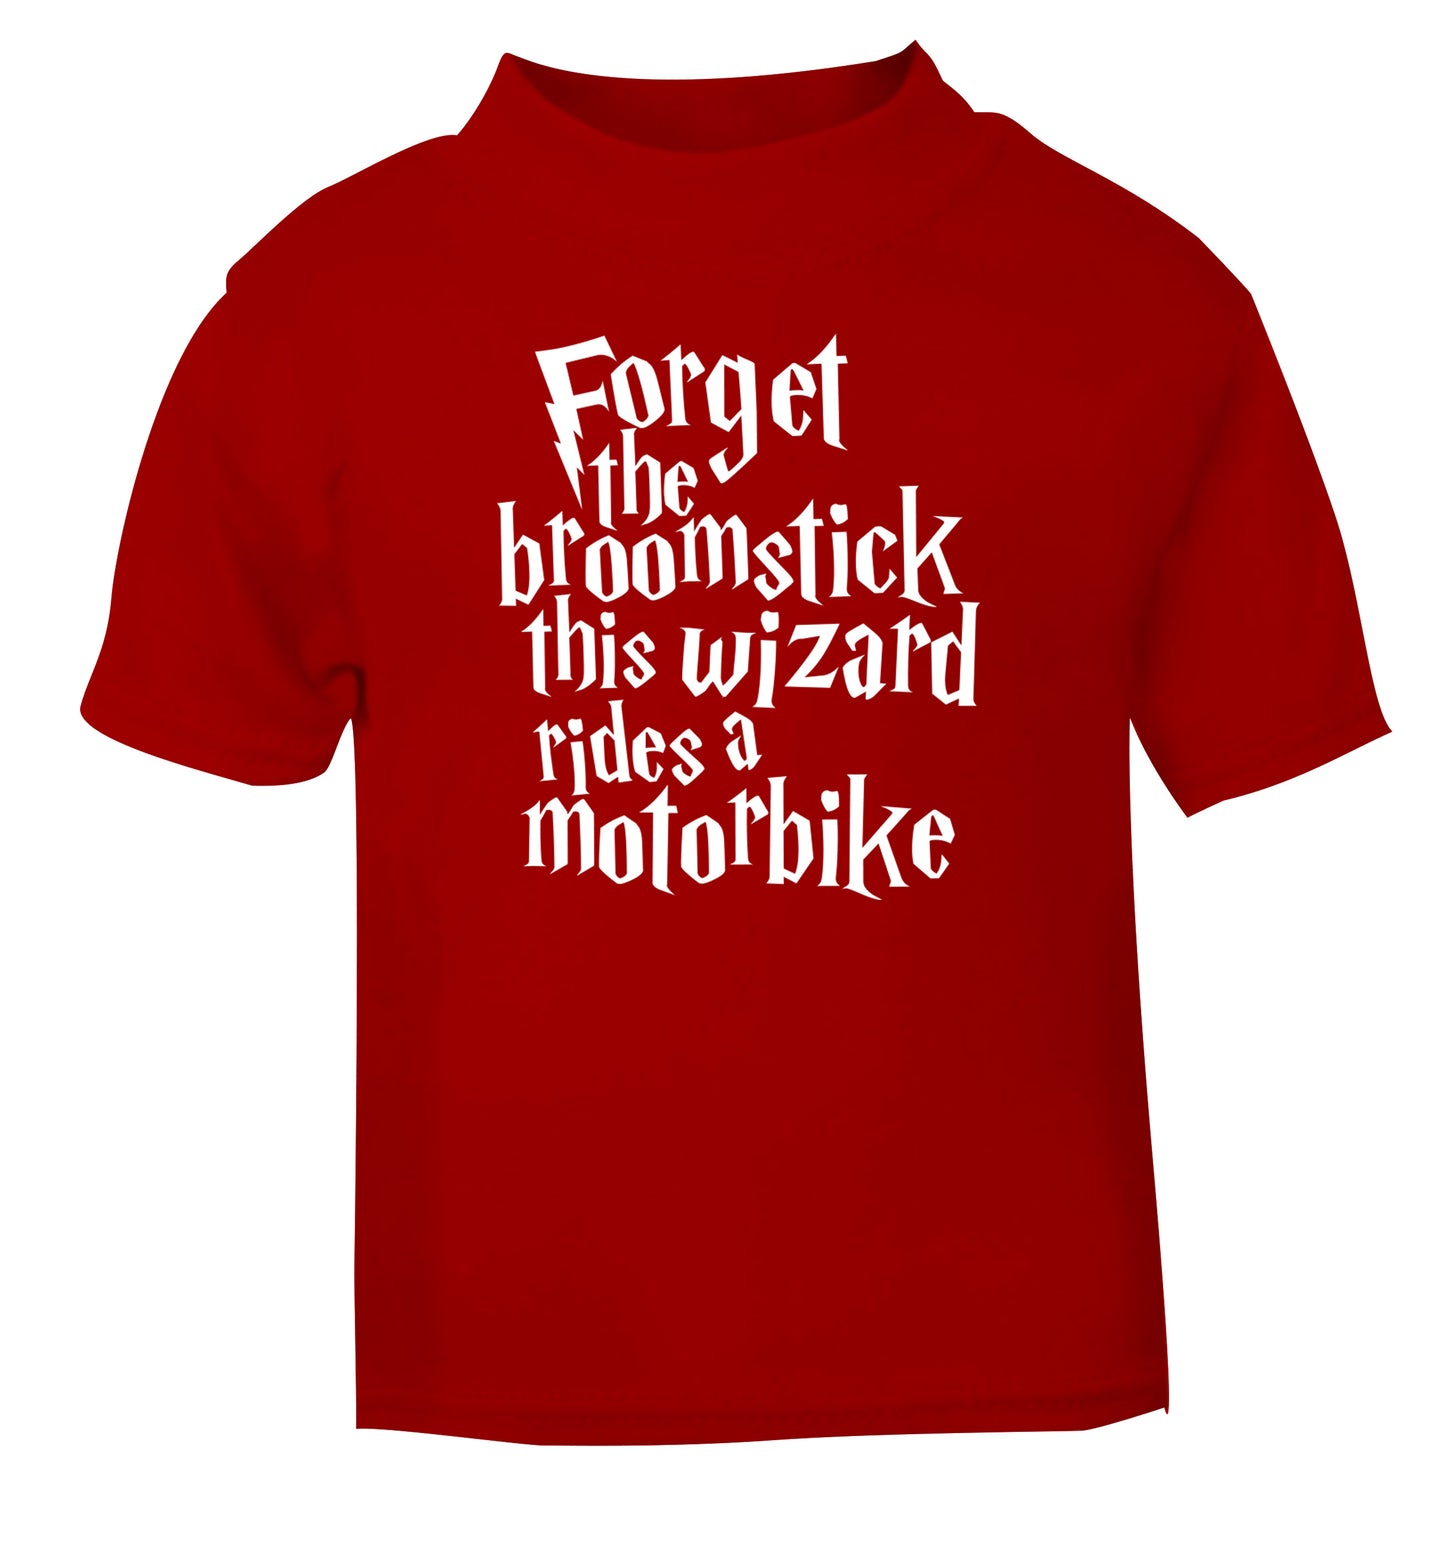 Forget the broomstick this wizard rides a motorbike red Baby Toddler Tshirt 2 Years